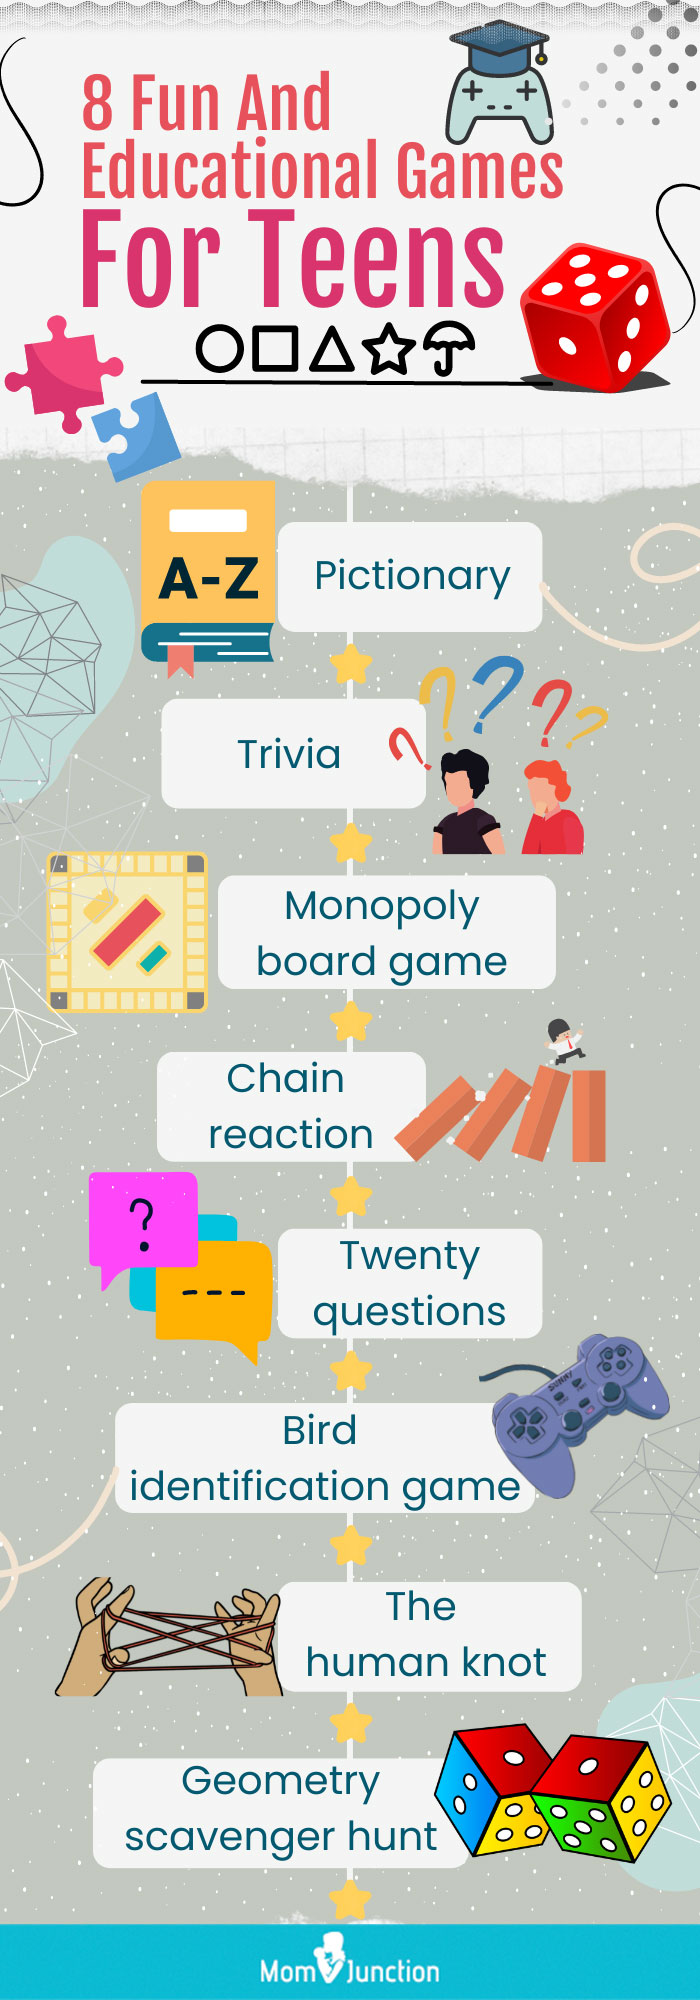 8 fun and educational games for teens (infographic)